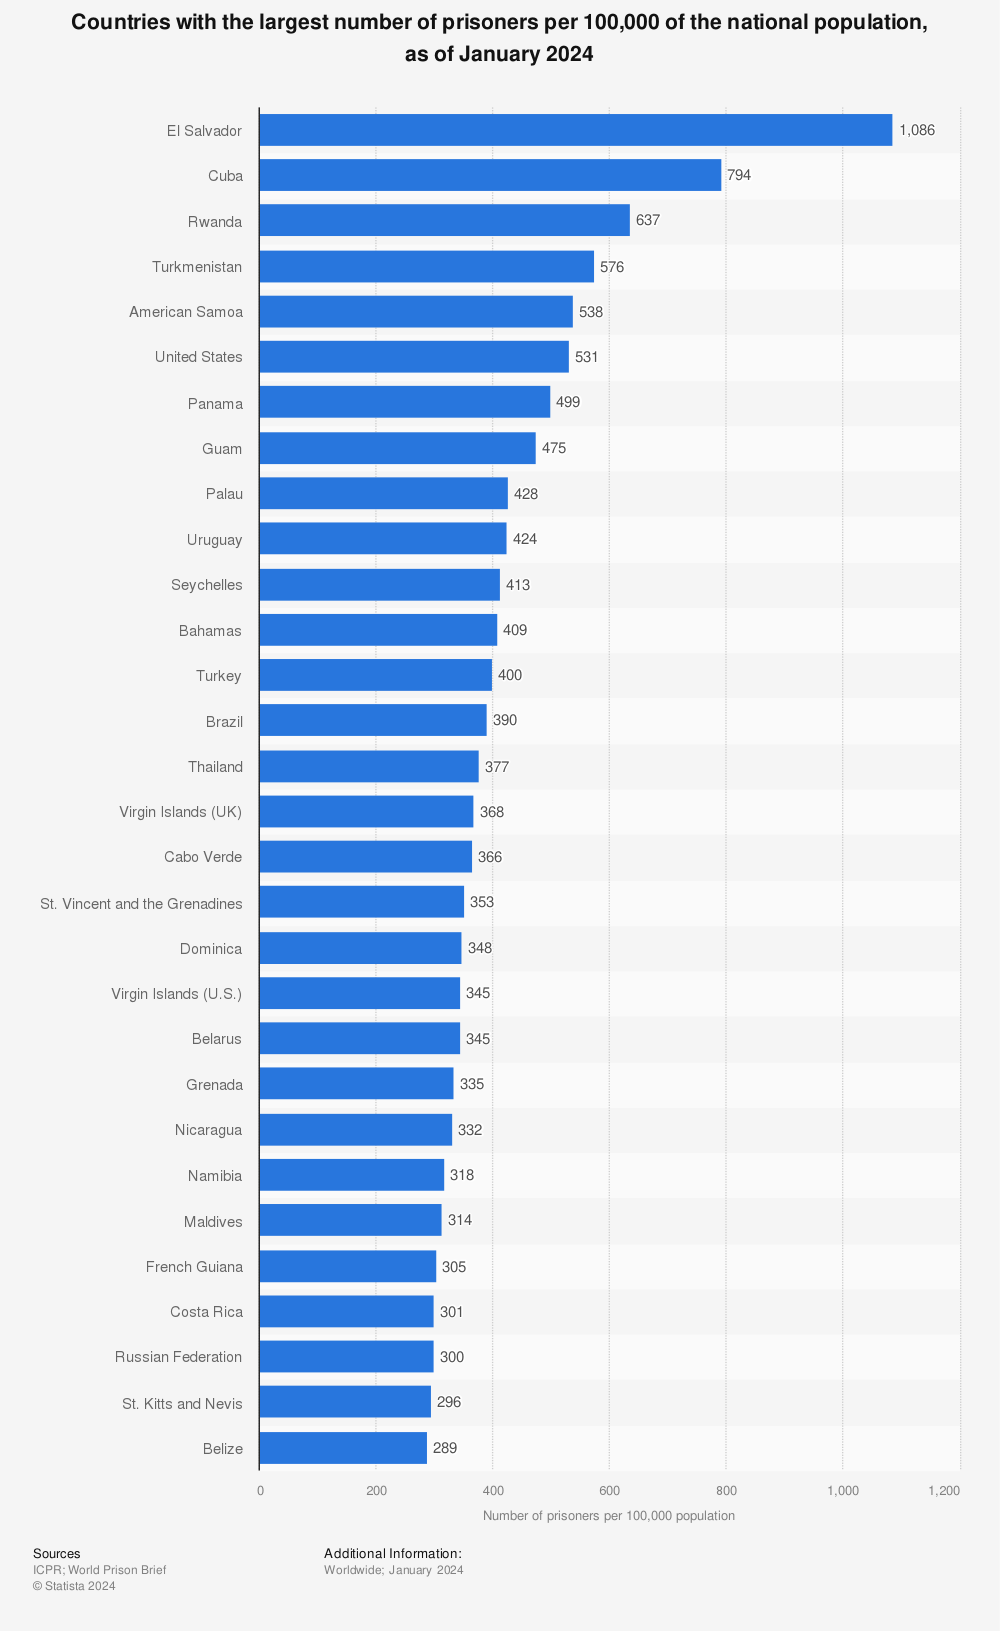 Statistic: Countries with the largest number of prisoners per 100,000 of the national population, as of May 2021 | Statista